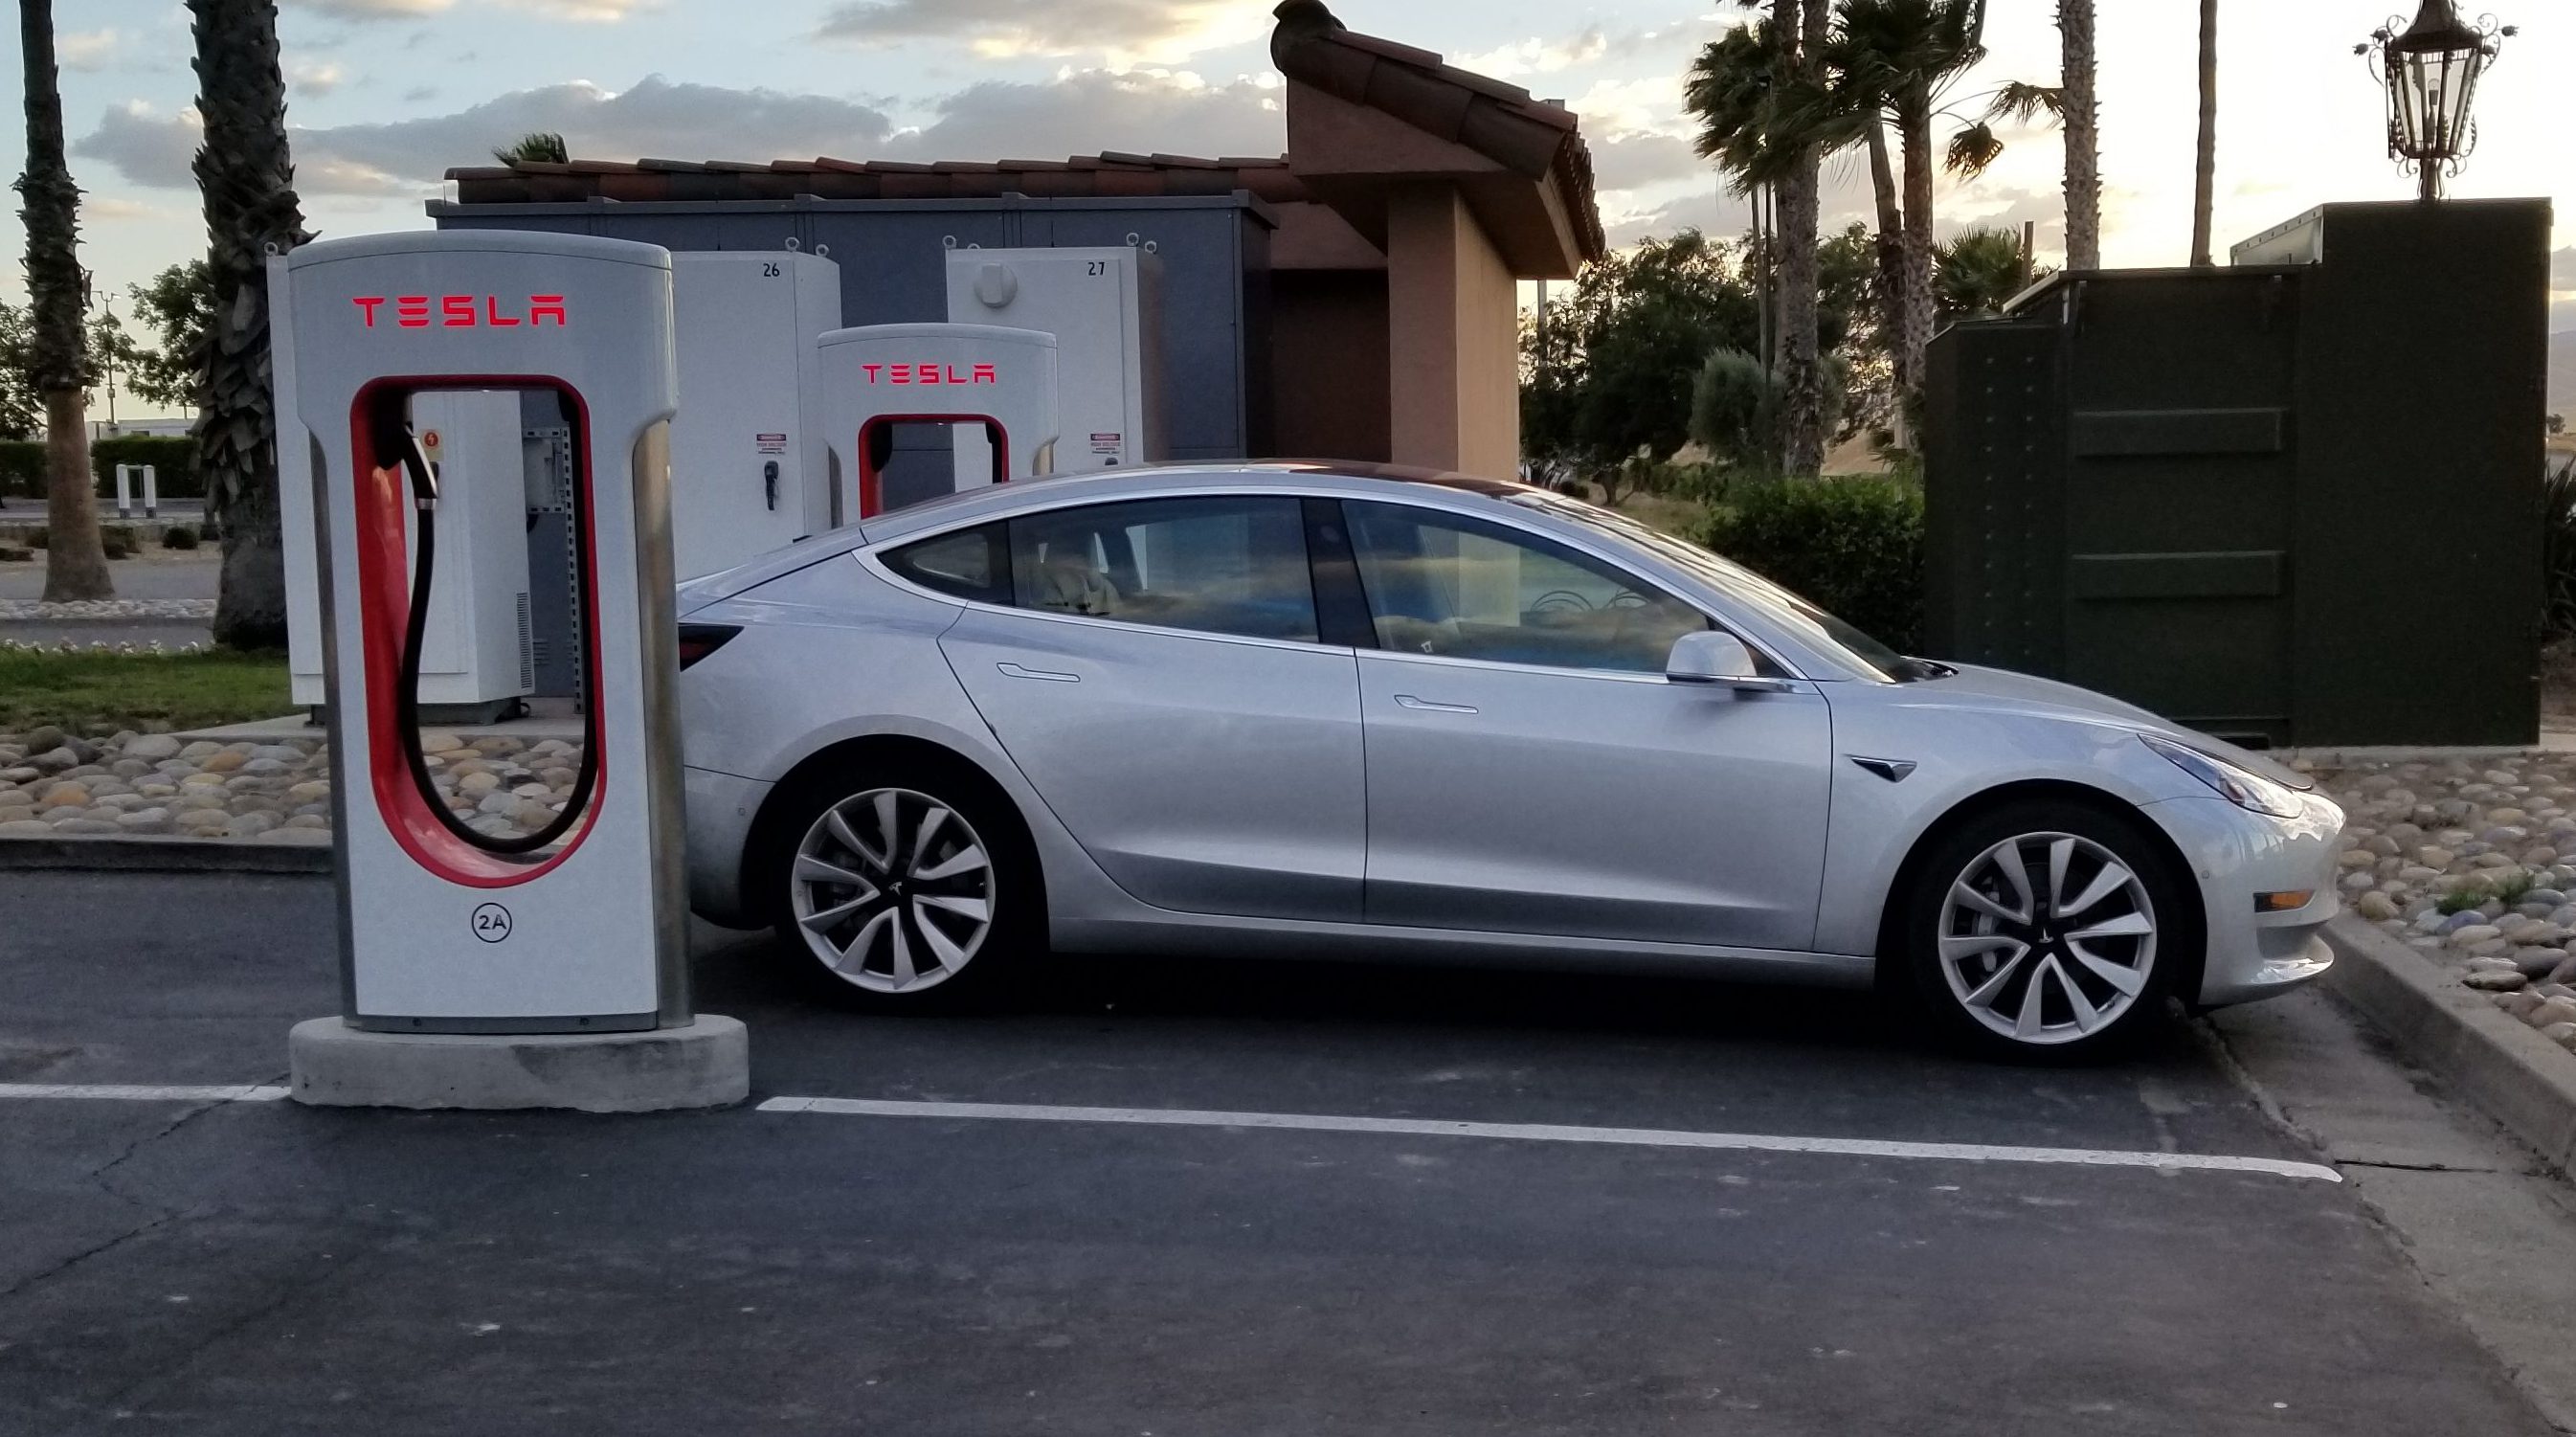 How to charge a tesla car